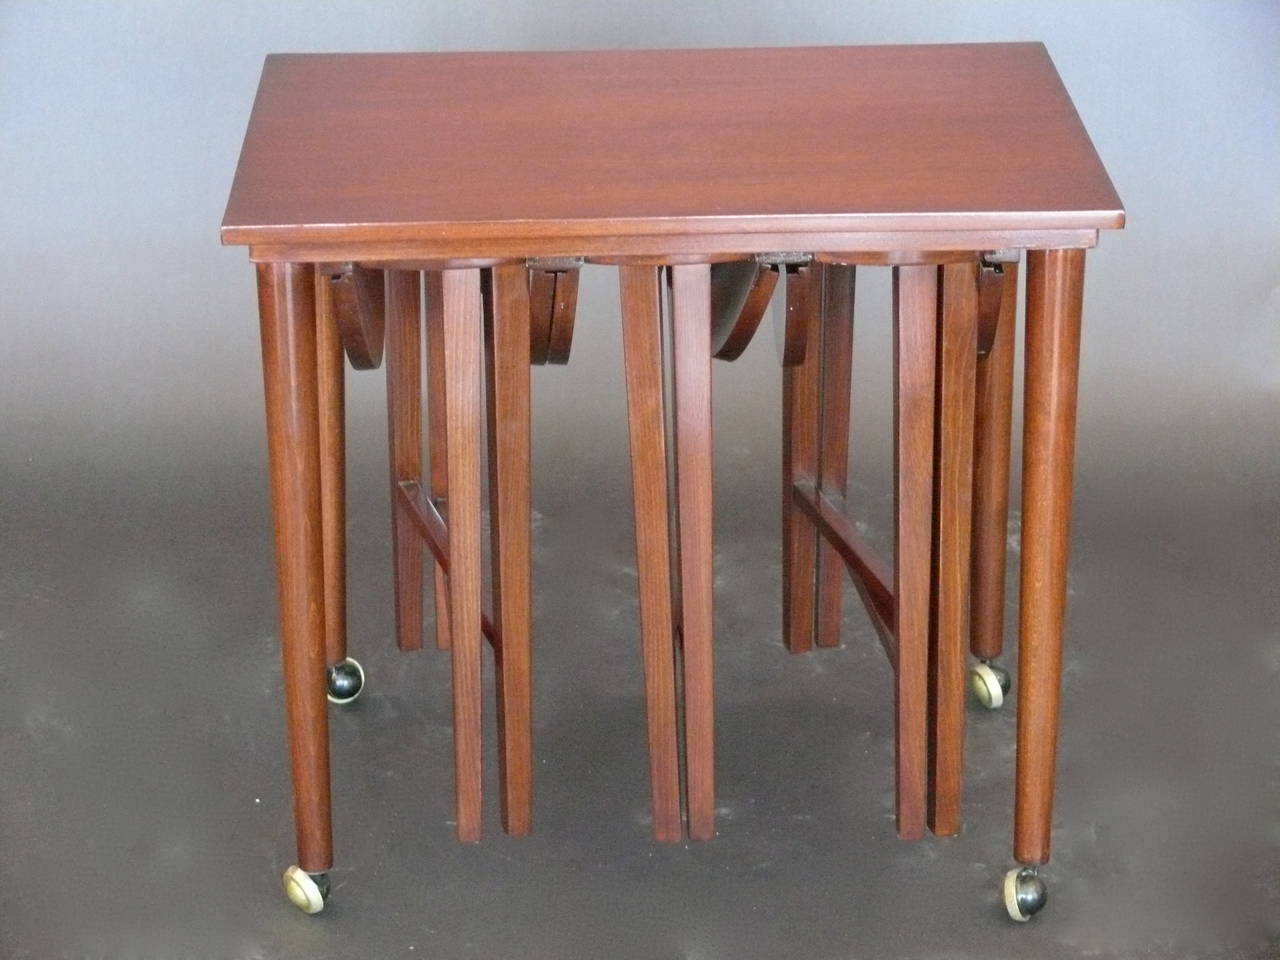 Fantastic end table on original brass casters. End table houses three round, drop-leaf tables. Newly refinished in a rich polished walnut. Very functional piece. Great for entertaining.